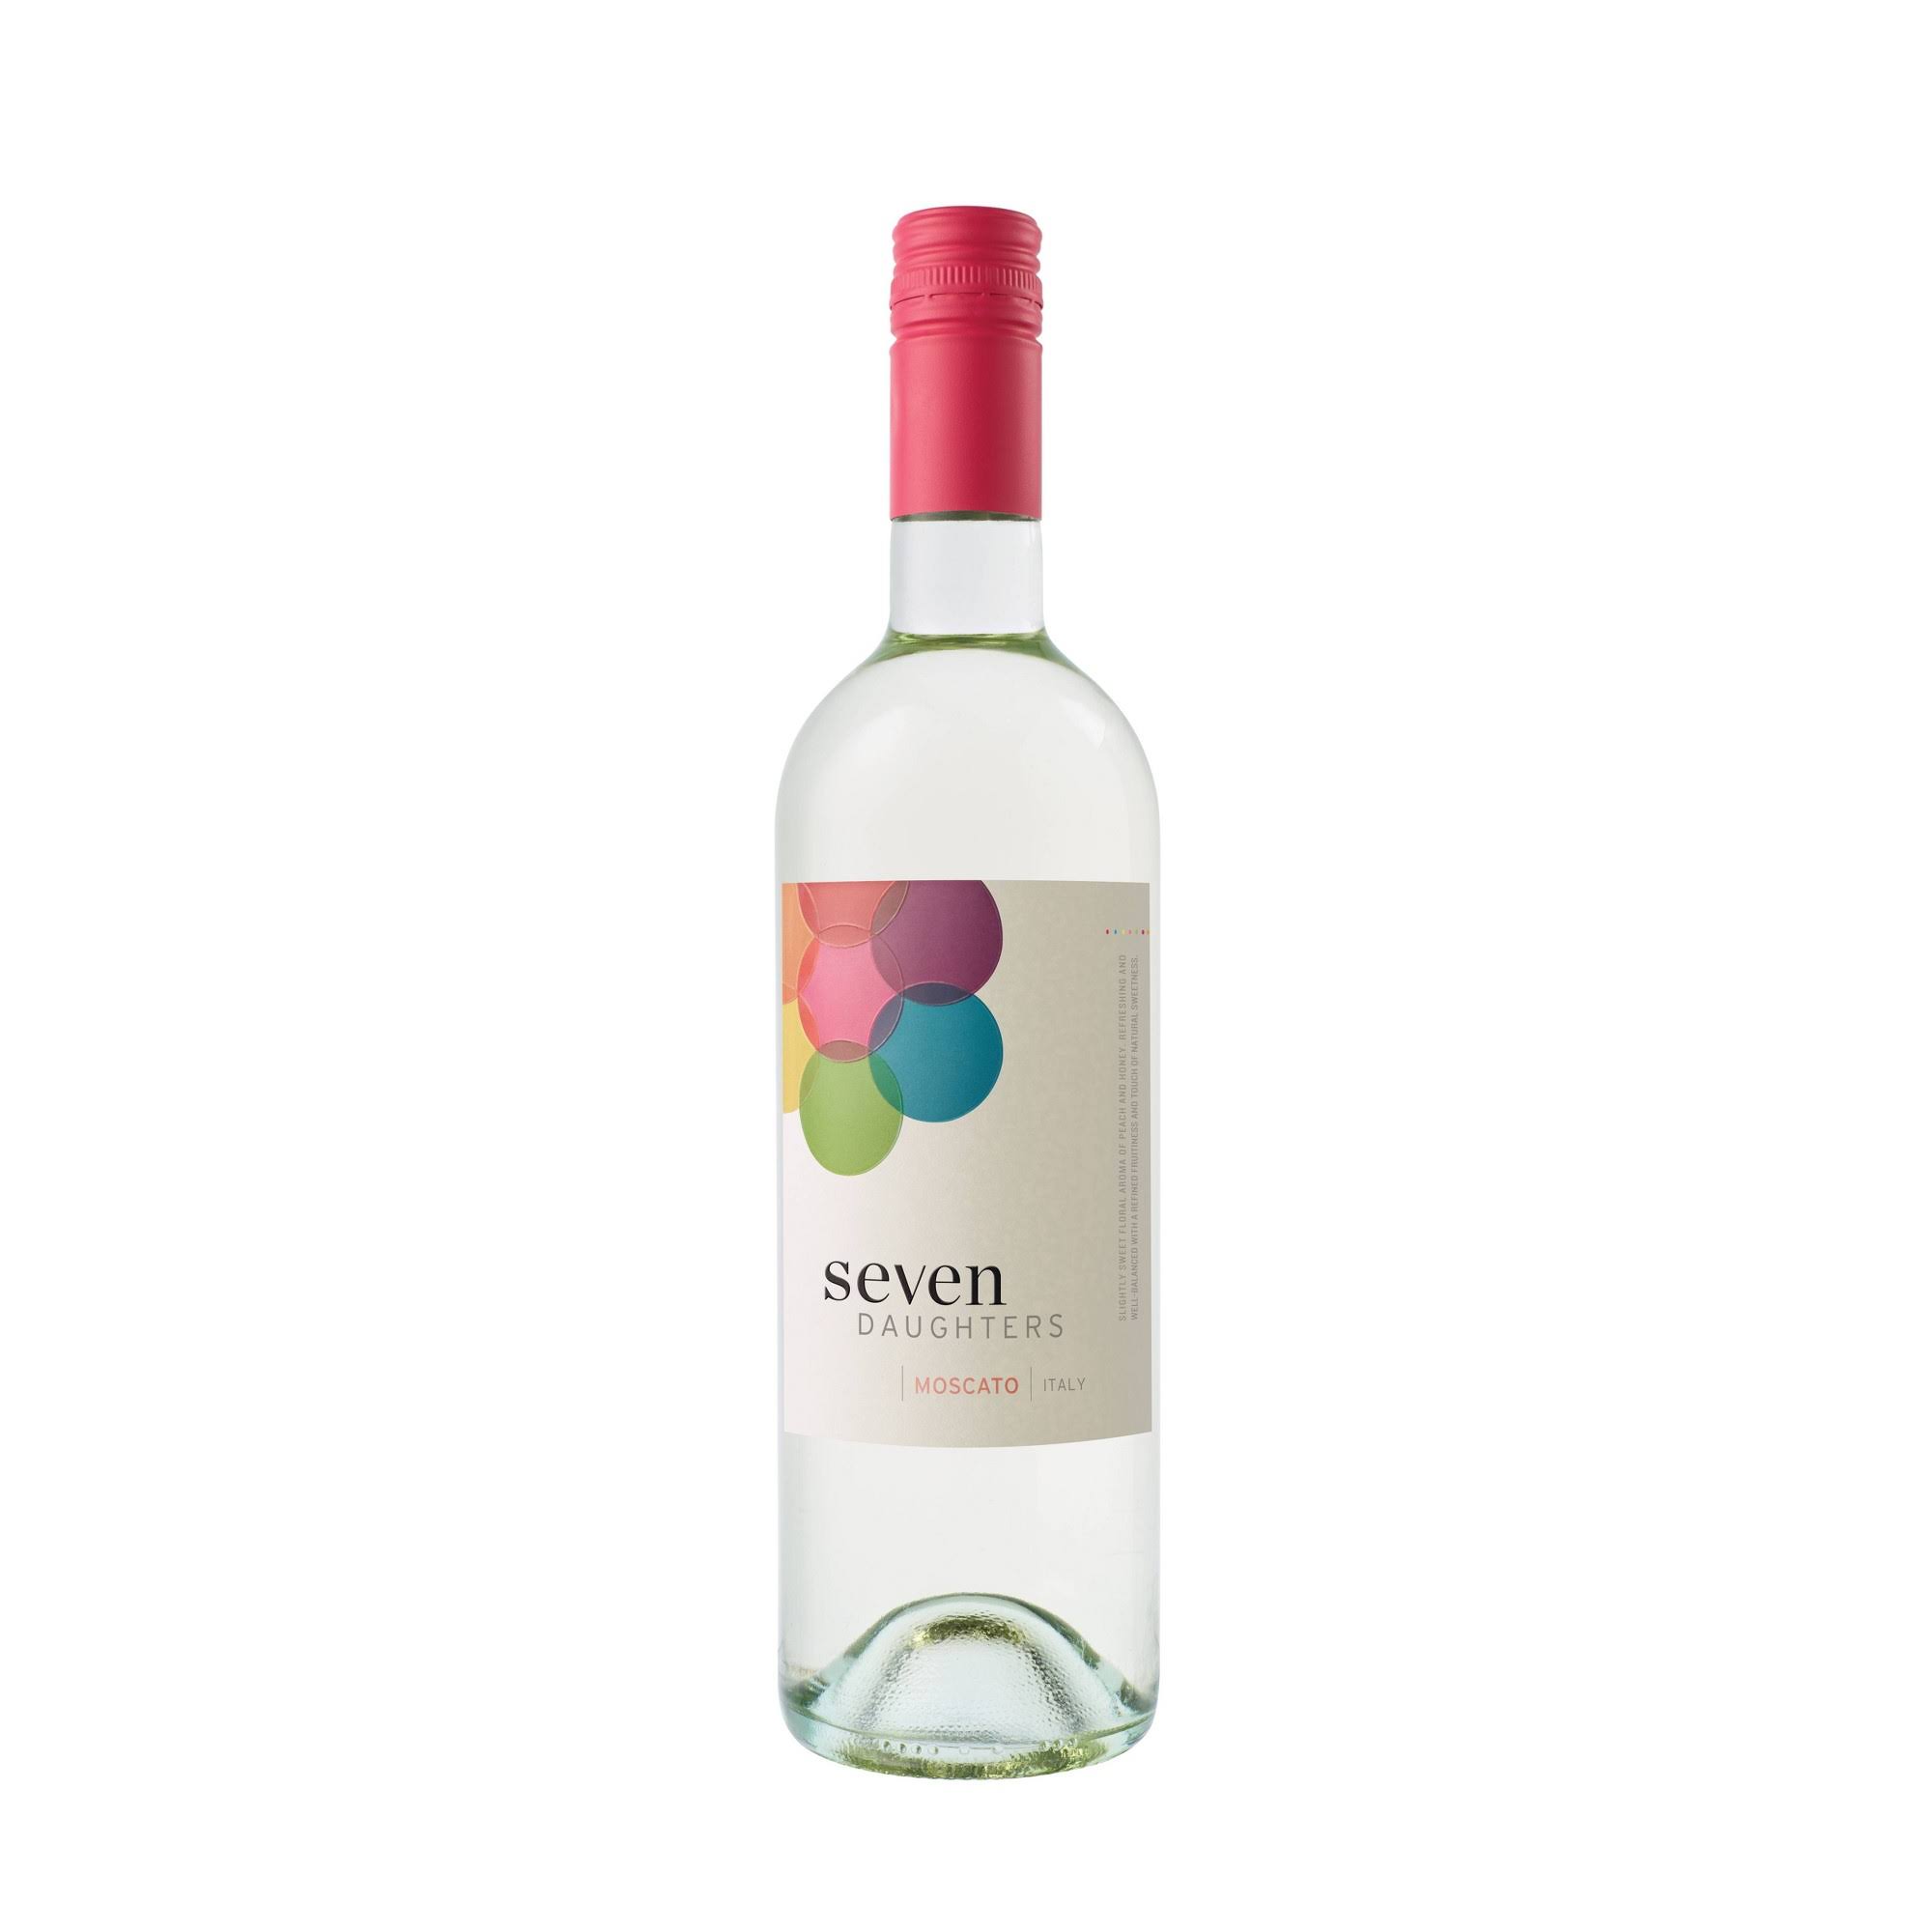 Seven Daughters Moscato - Italy